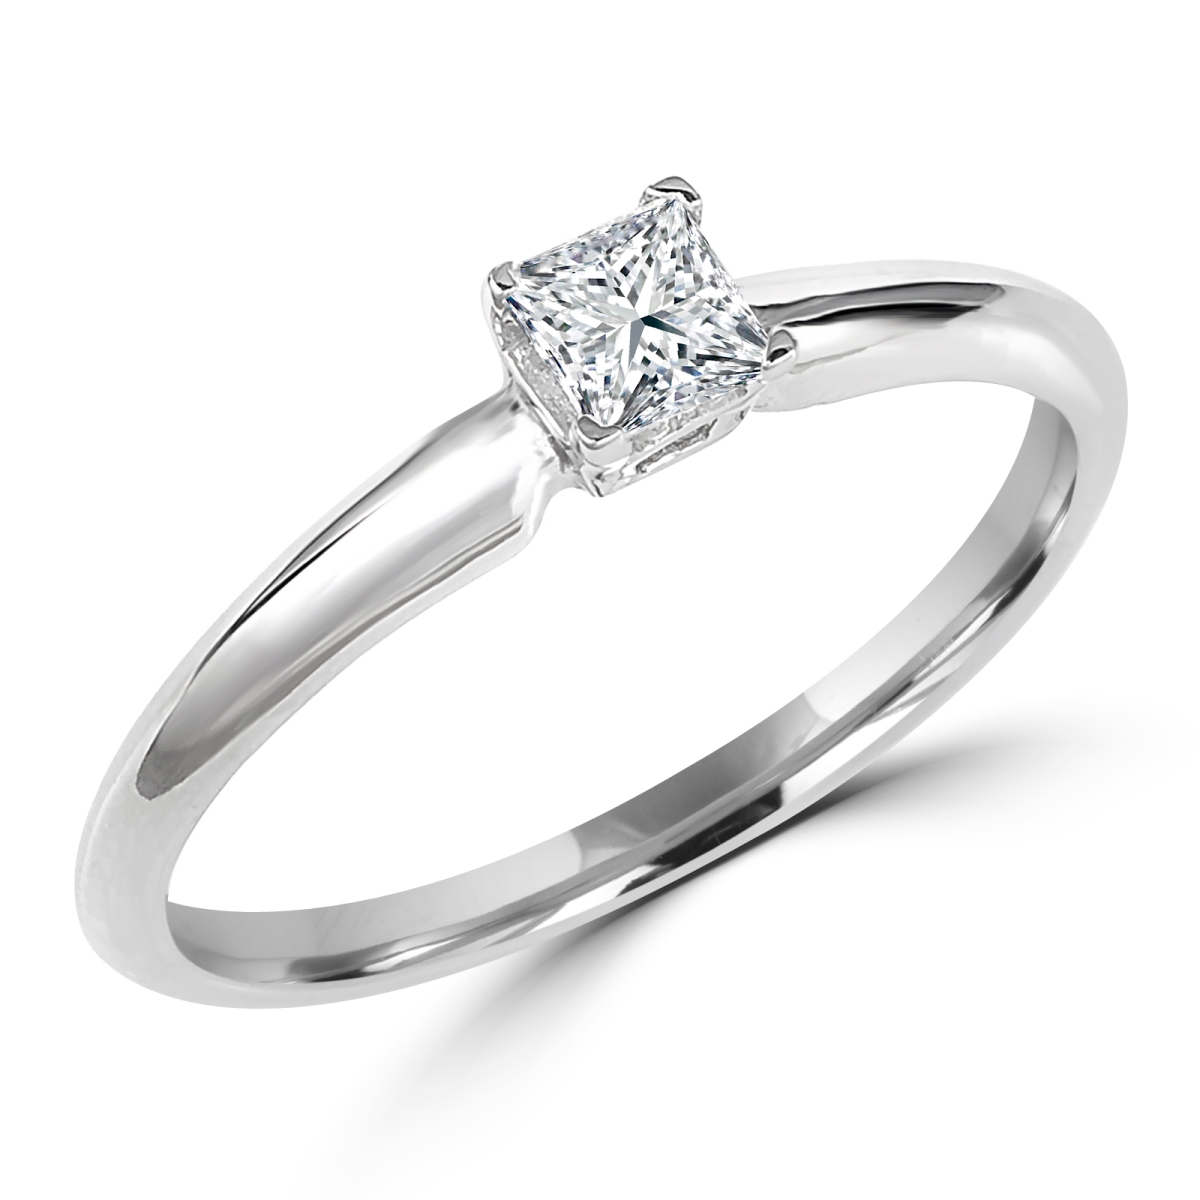 Picture of Majesty Diamonds MD170172-8.25 0.16 CT Princess Diamond Solitaire Engagement Ring in 10K White Gold - 8.25